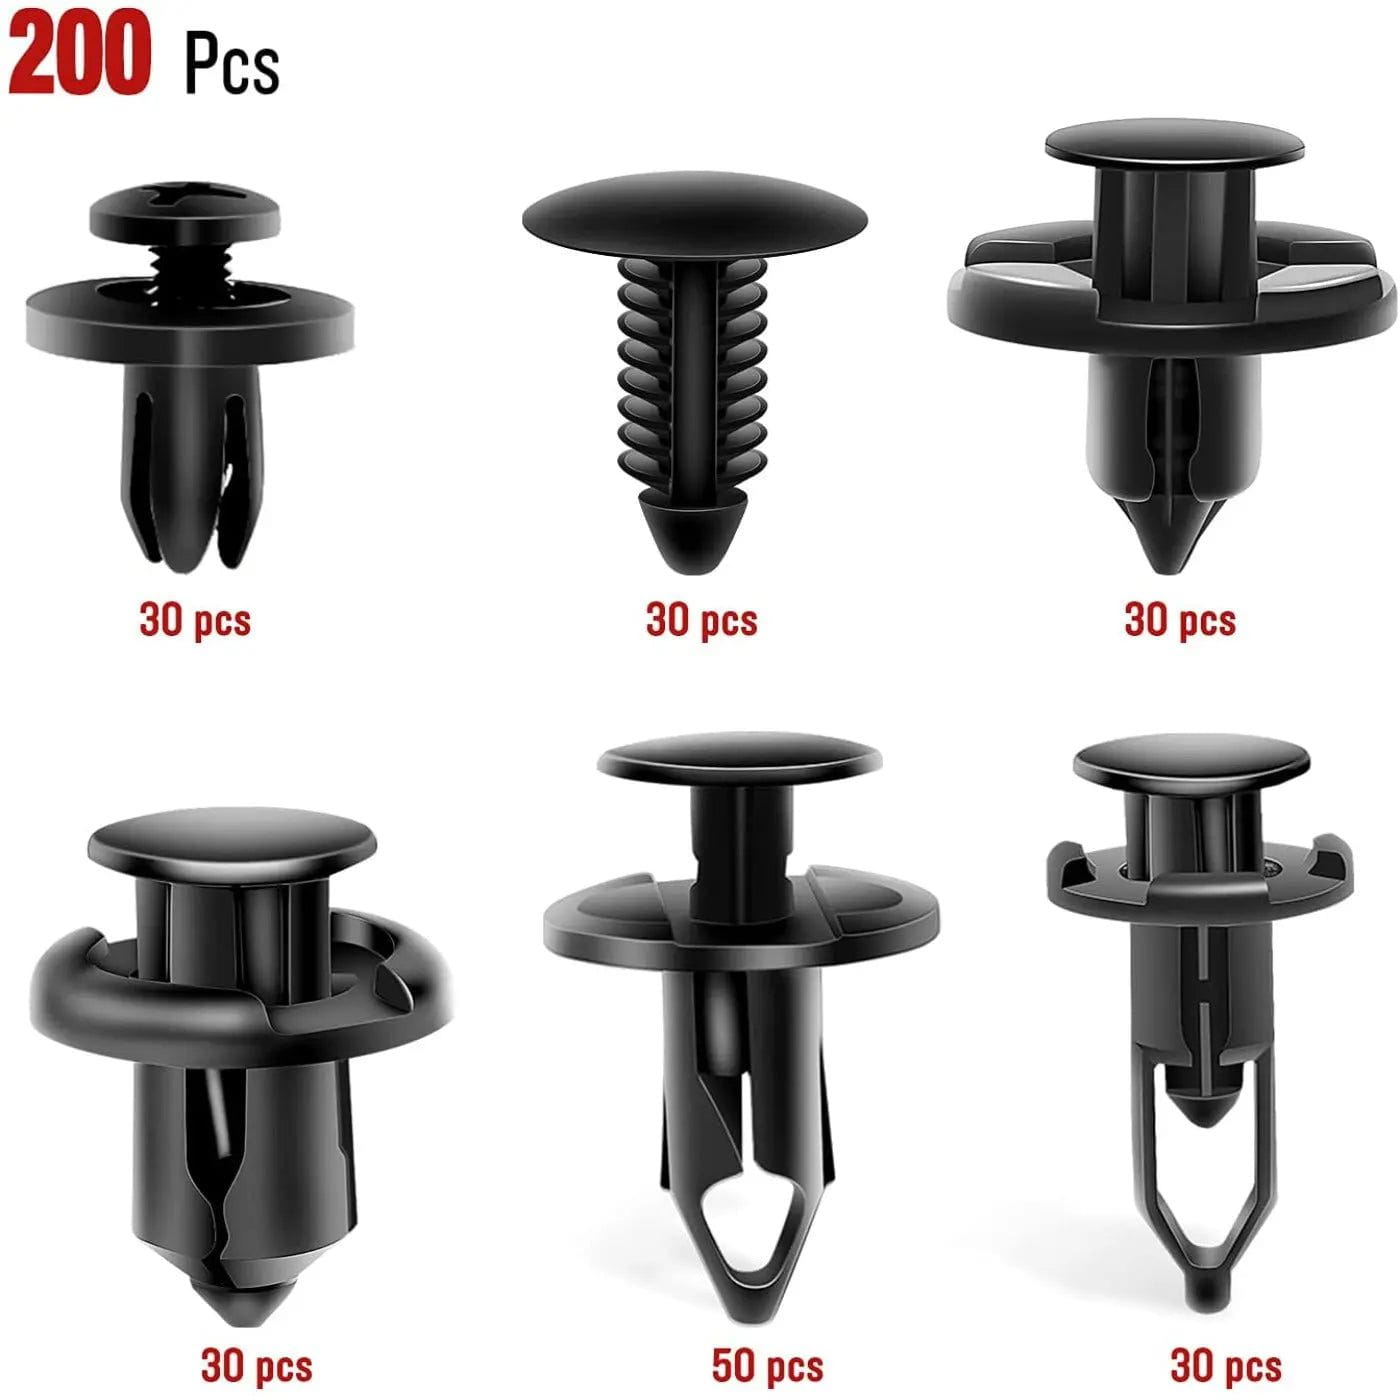 retainer clips 200 Pcs Hole 6mm 7mm 8mm 9mm 10mm Car Retainer Clips Expansion Screws Replacement Kit Bumper Push Rivet Clips for GM Ford Toyota Honda Chrysler Nissan